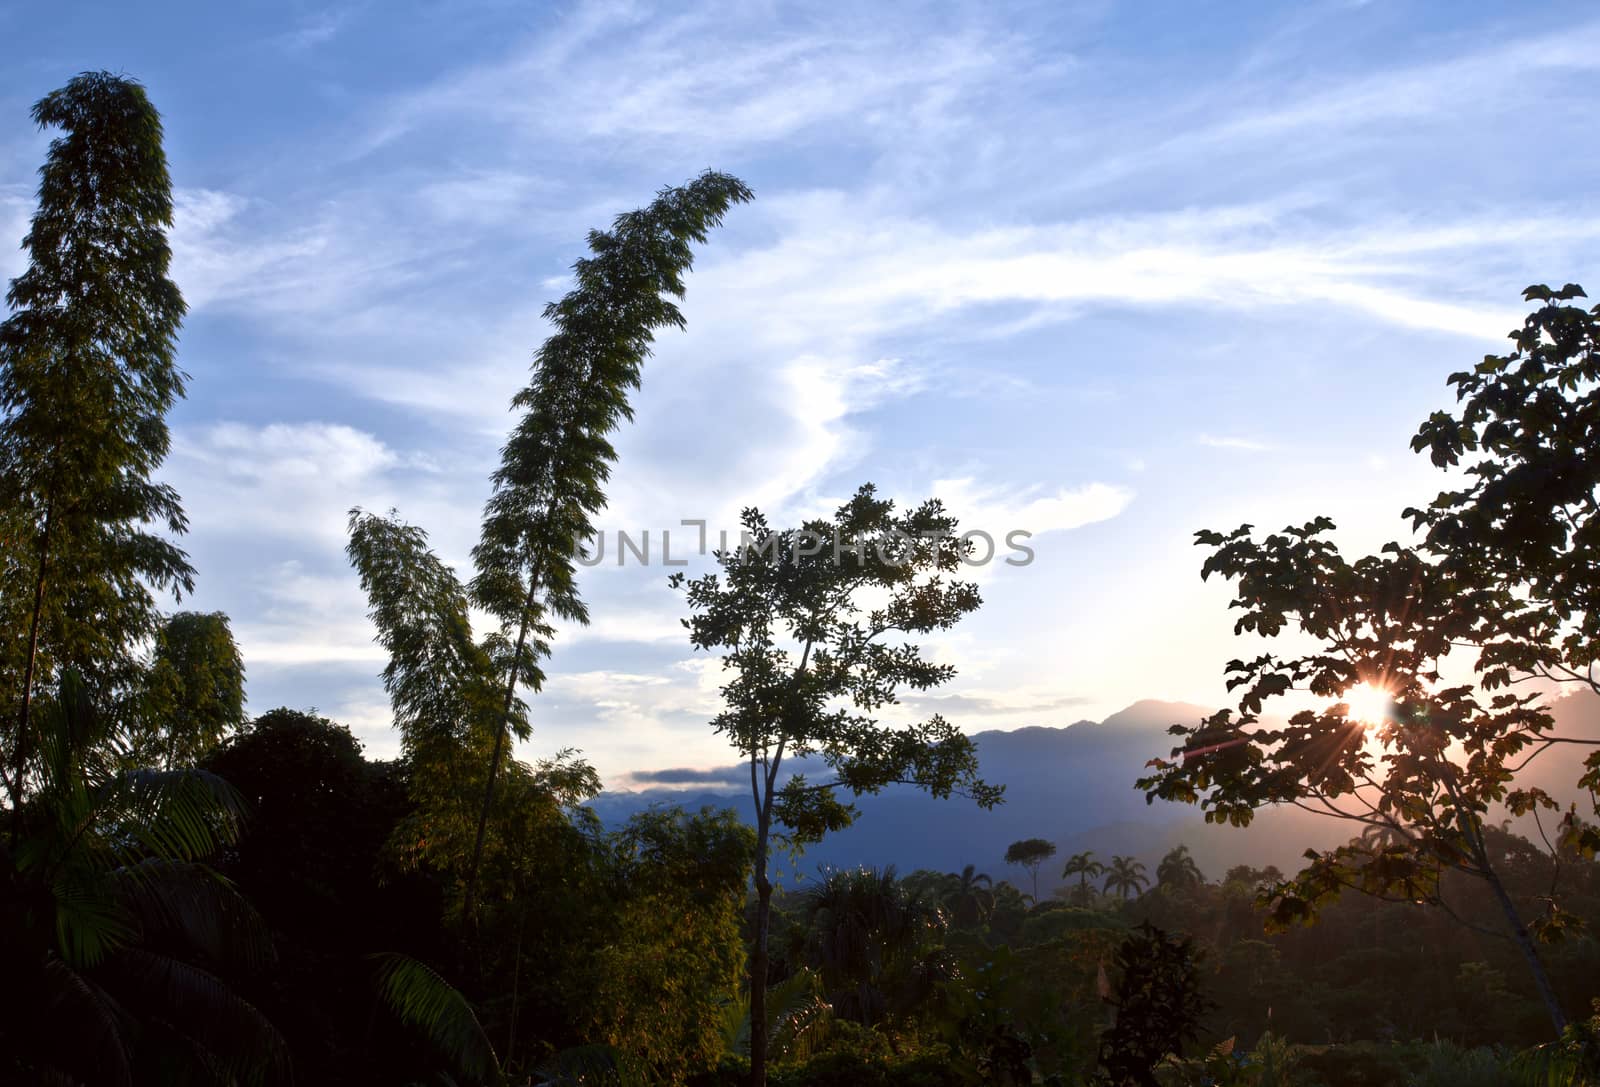 From Andes to Amazon, View of the tropical rainforest, Ecuador